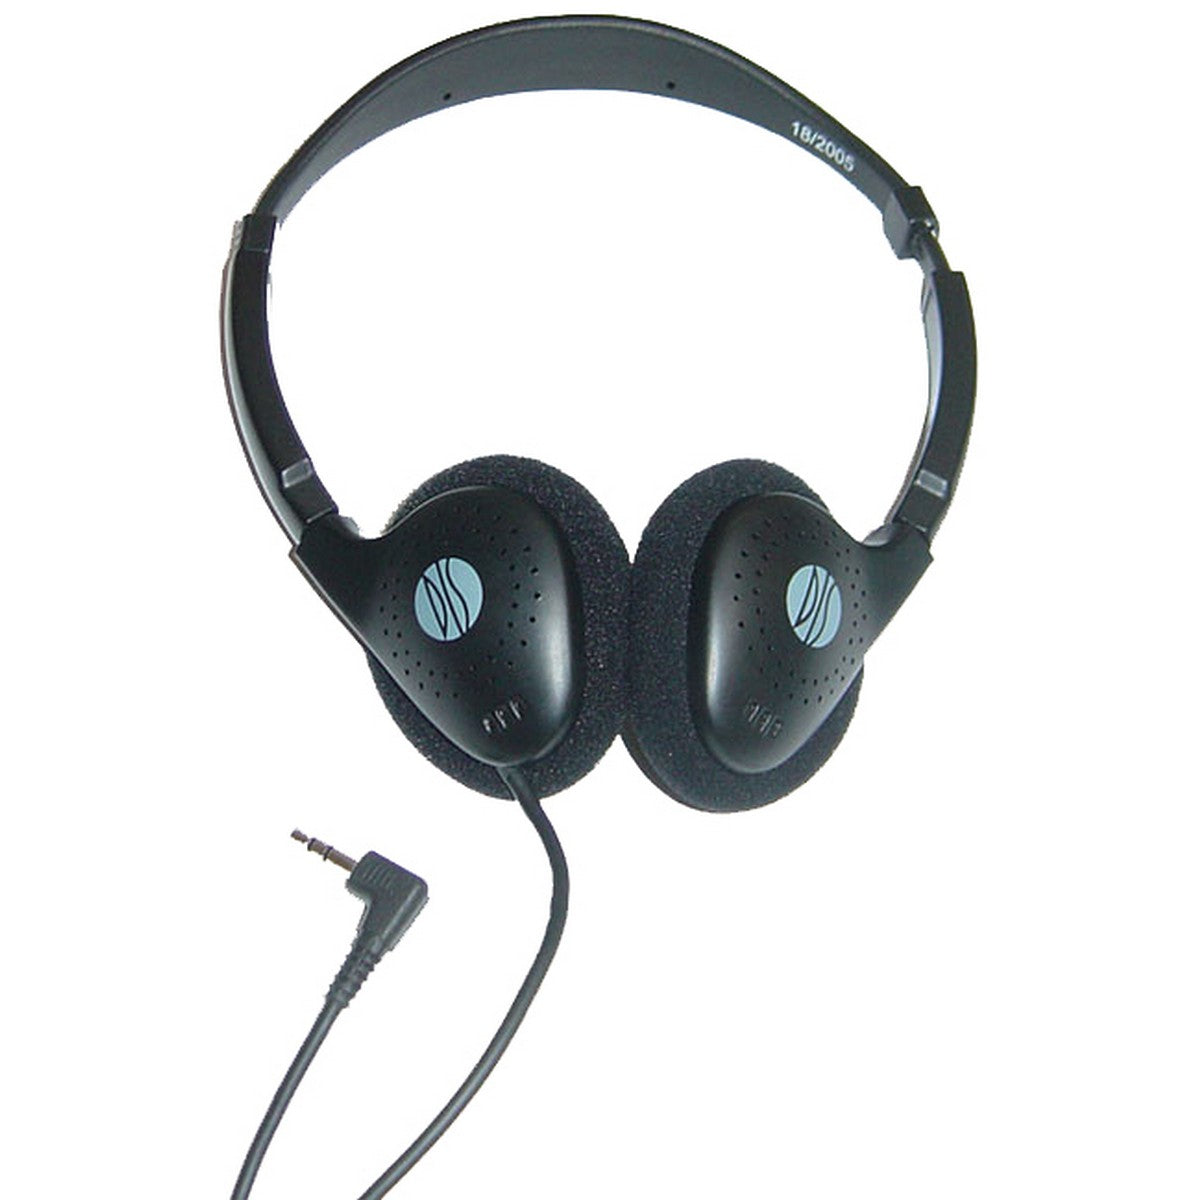 Shure DH 6021 | Stereo Headphone for DR 60xx Digital Receivers